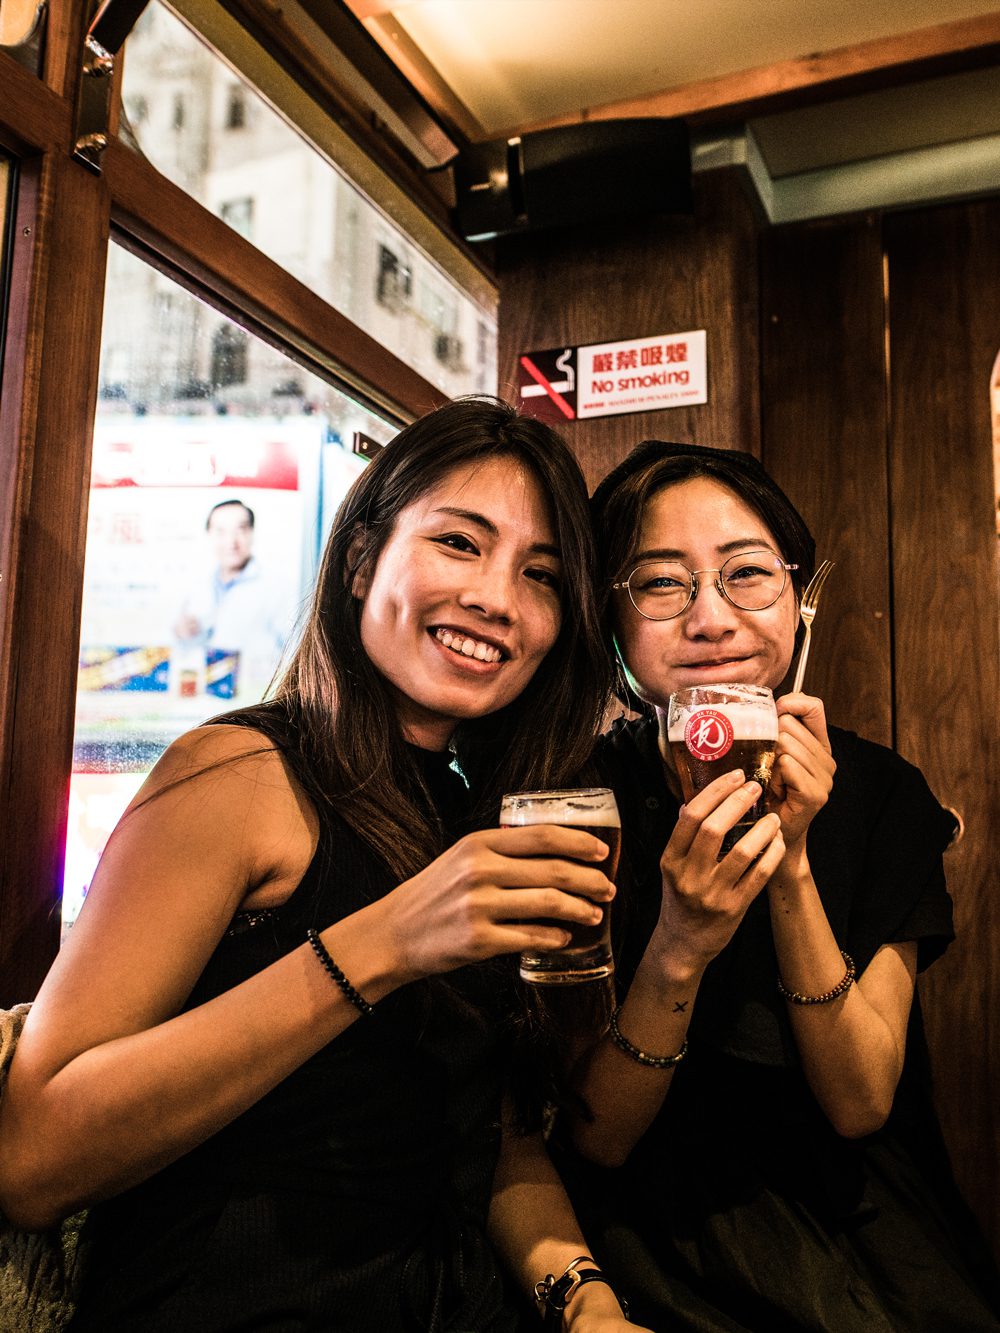 Two young ladies holding pints of HK YAU beer and smiling at the camera during an event on tram